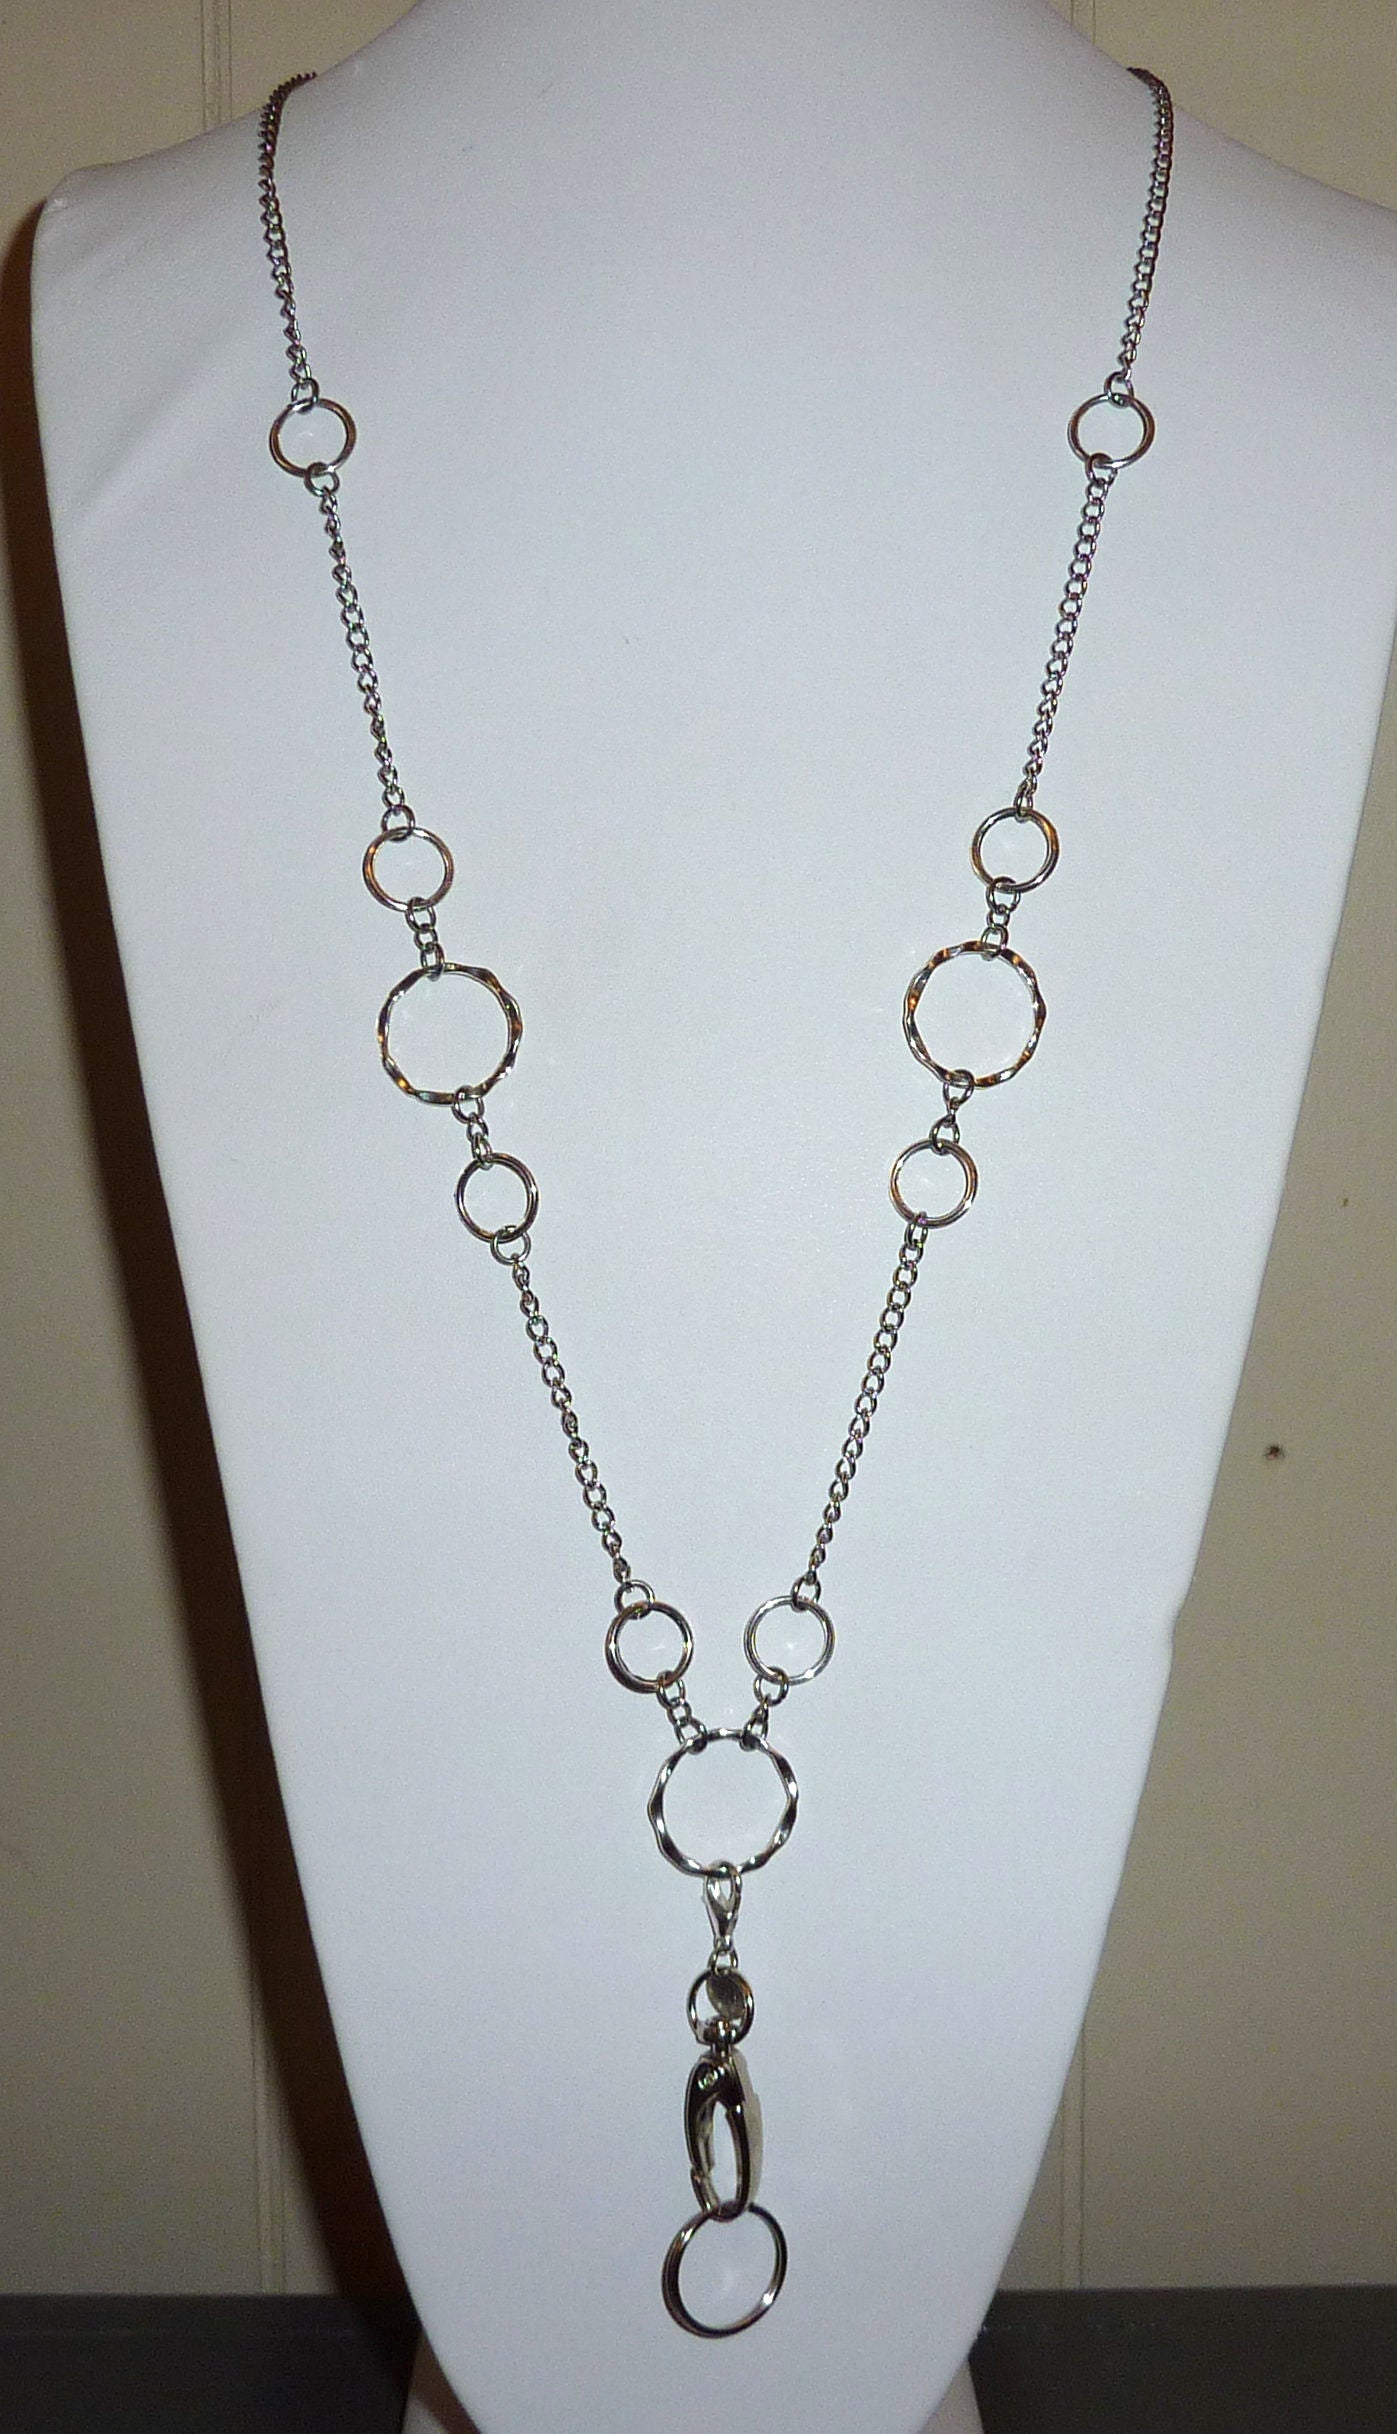 Looks Like Jewelry! Women's Fashion Necklace Lanyard, Adjustable from 24" to 36" - Magnetic Breakaway Style